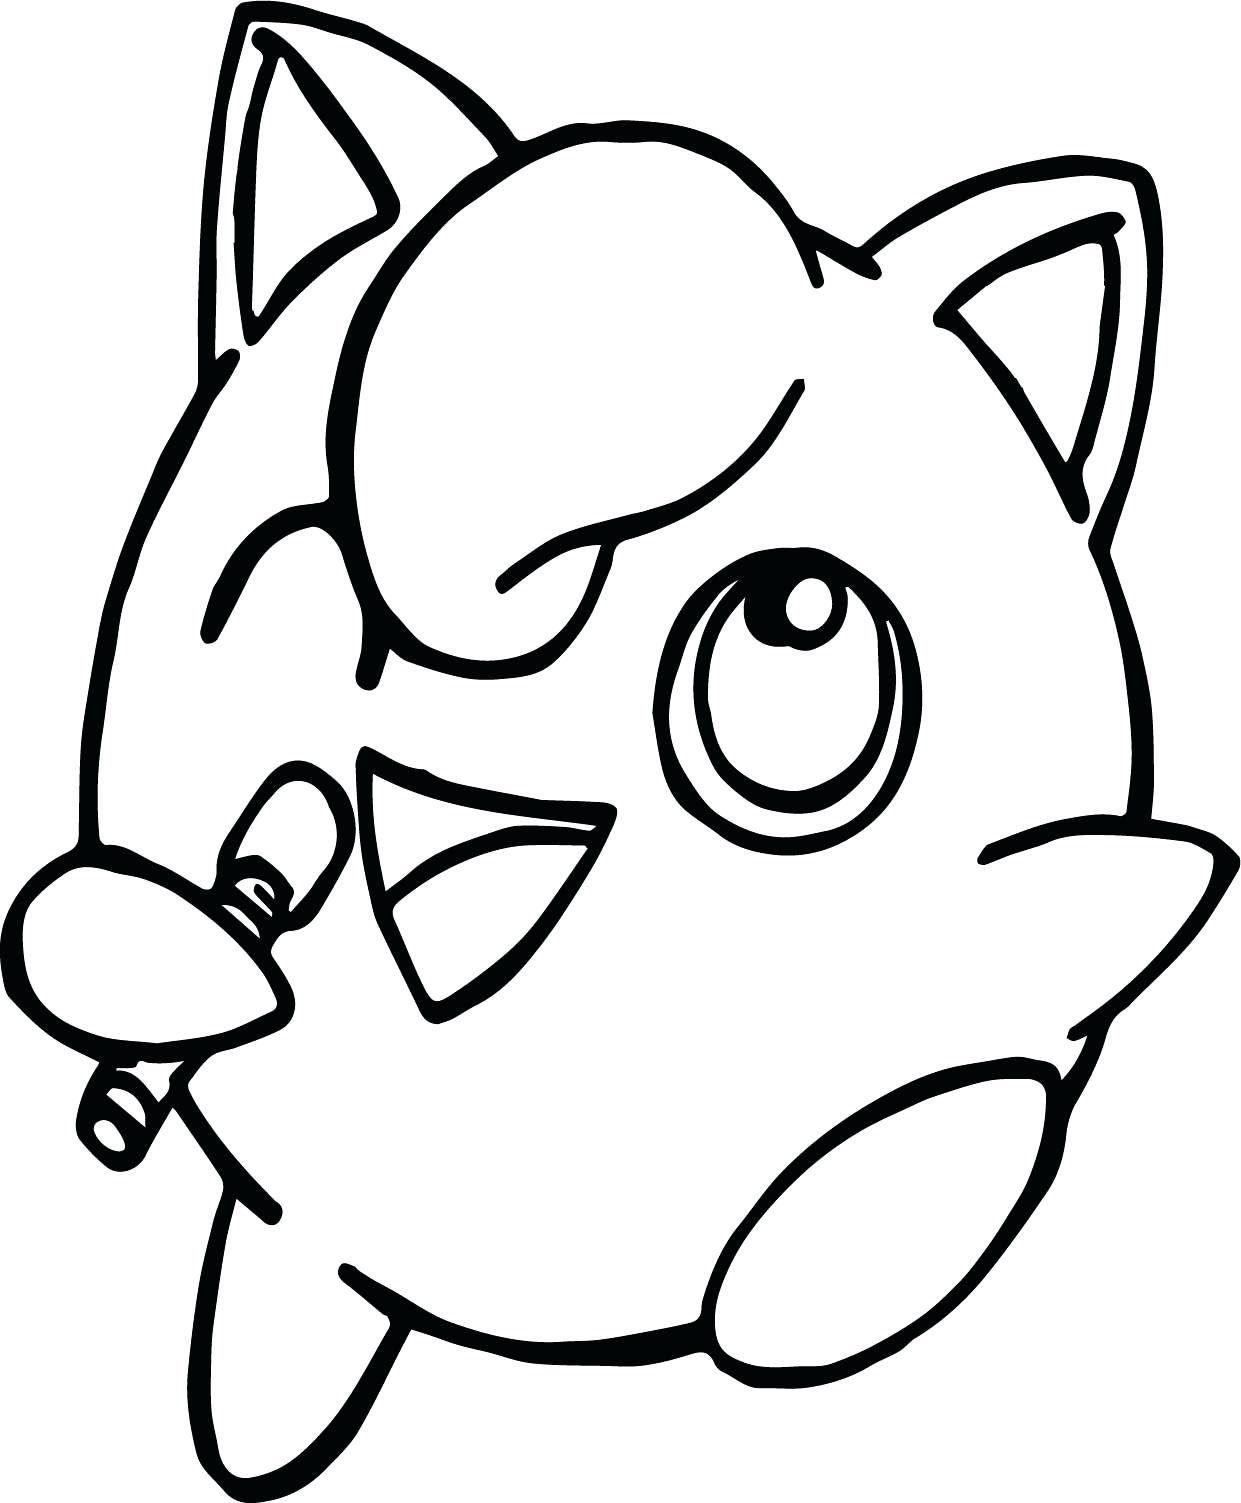 Jigglypuff Coloring Page Jigglypuff Coloring Pokemon Singing Printable Template Another